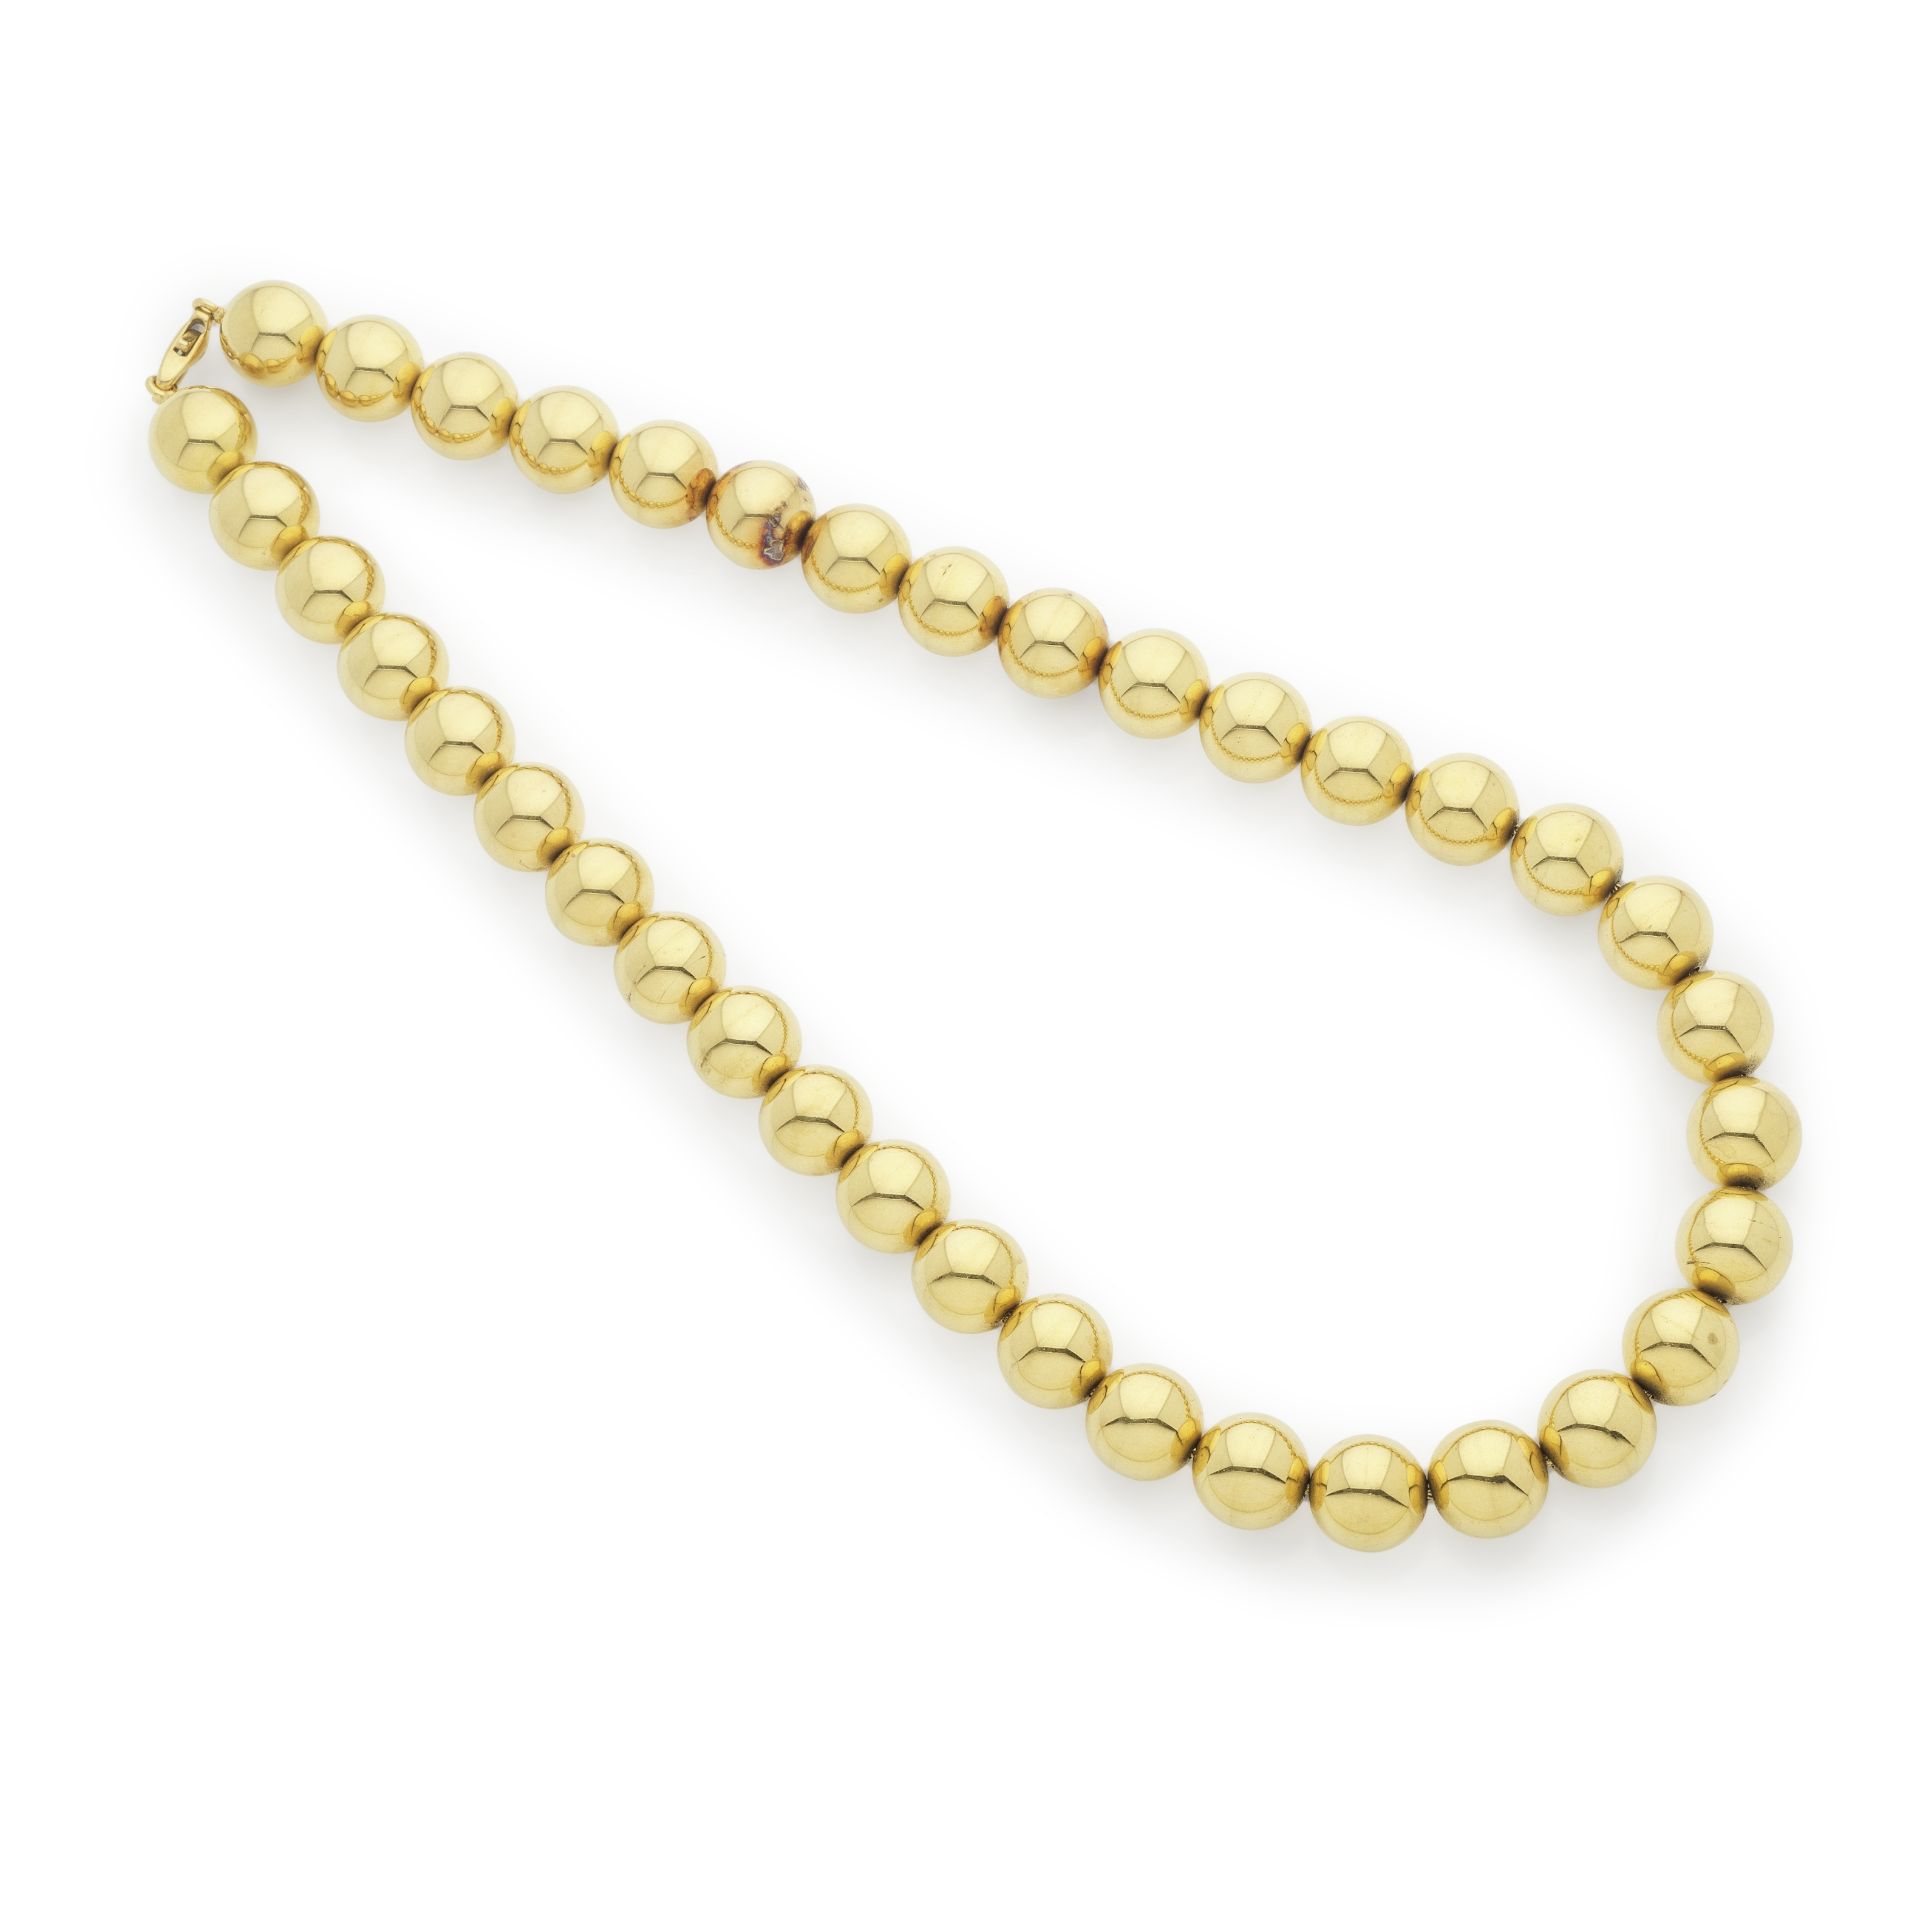 COLLIER PERLES D'OR